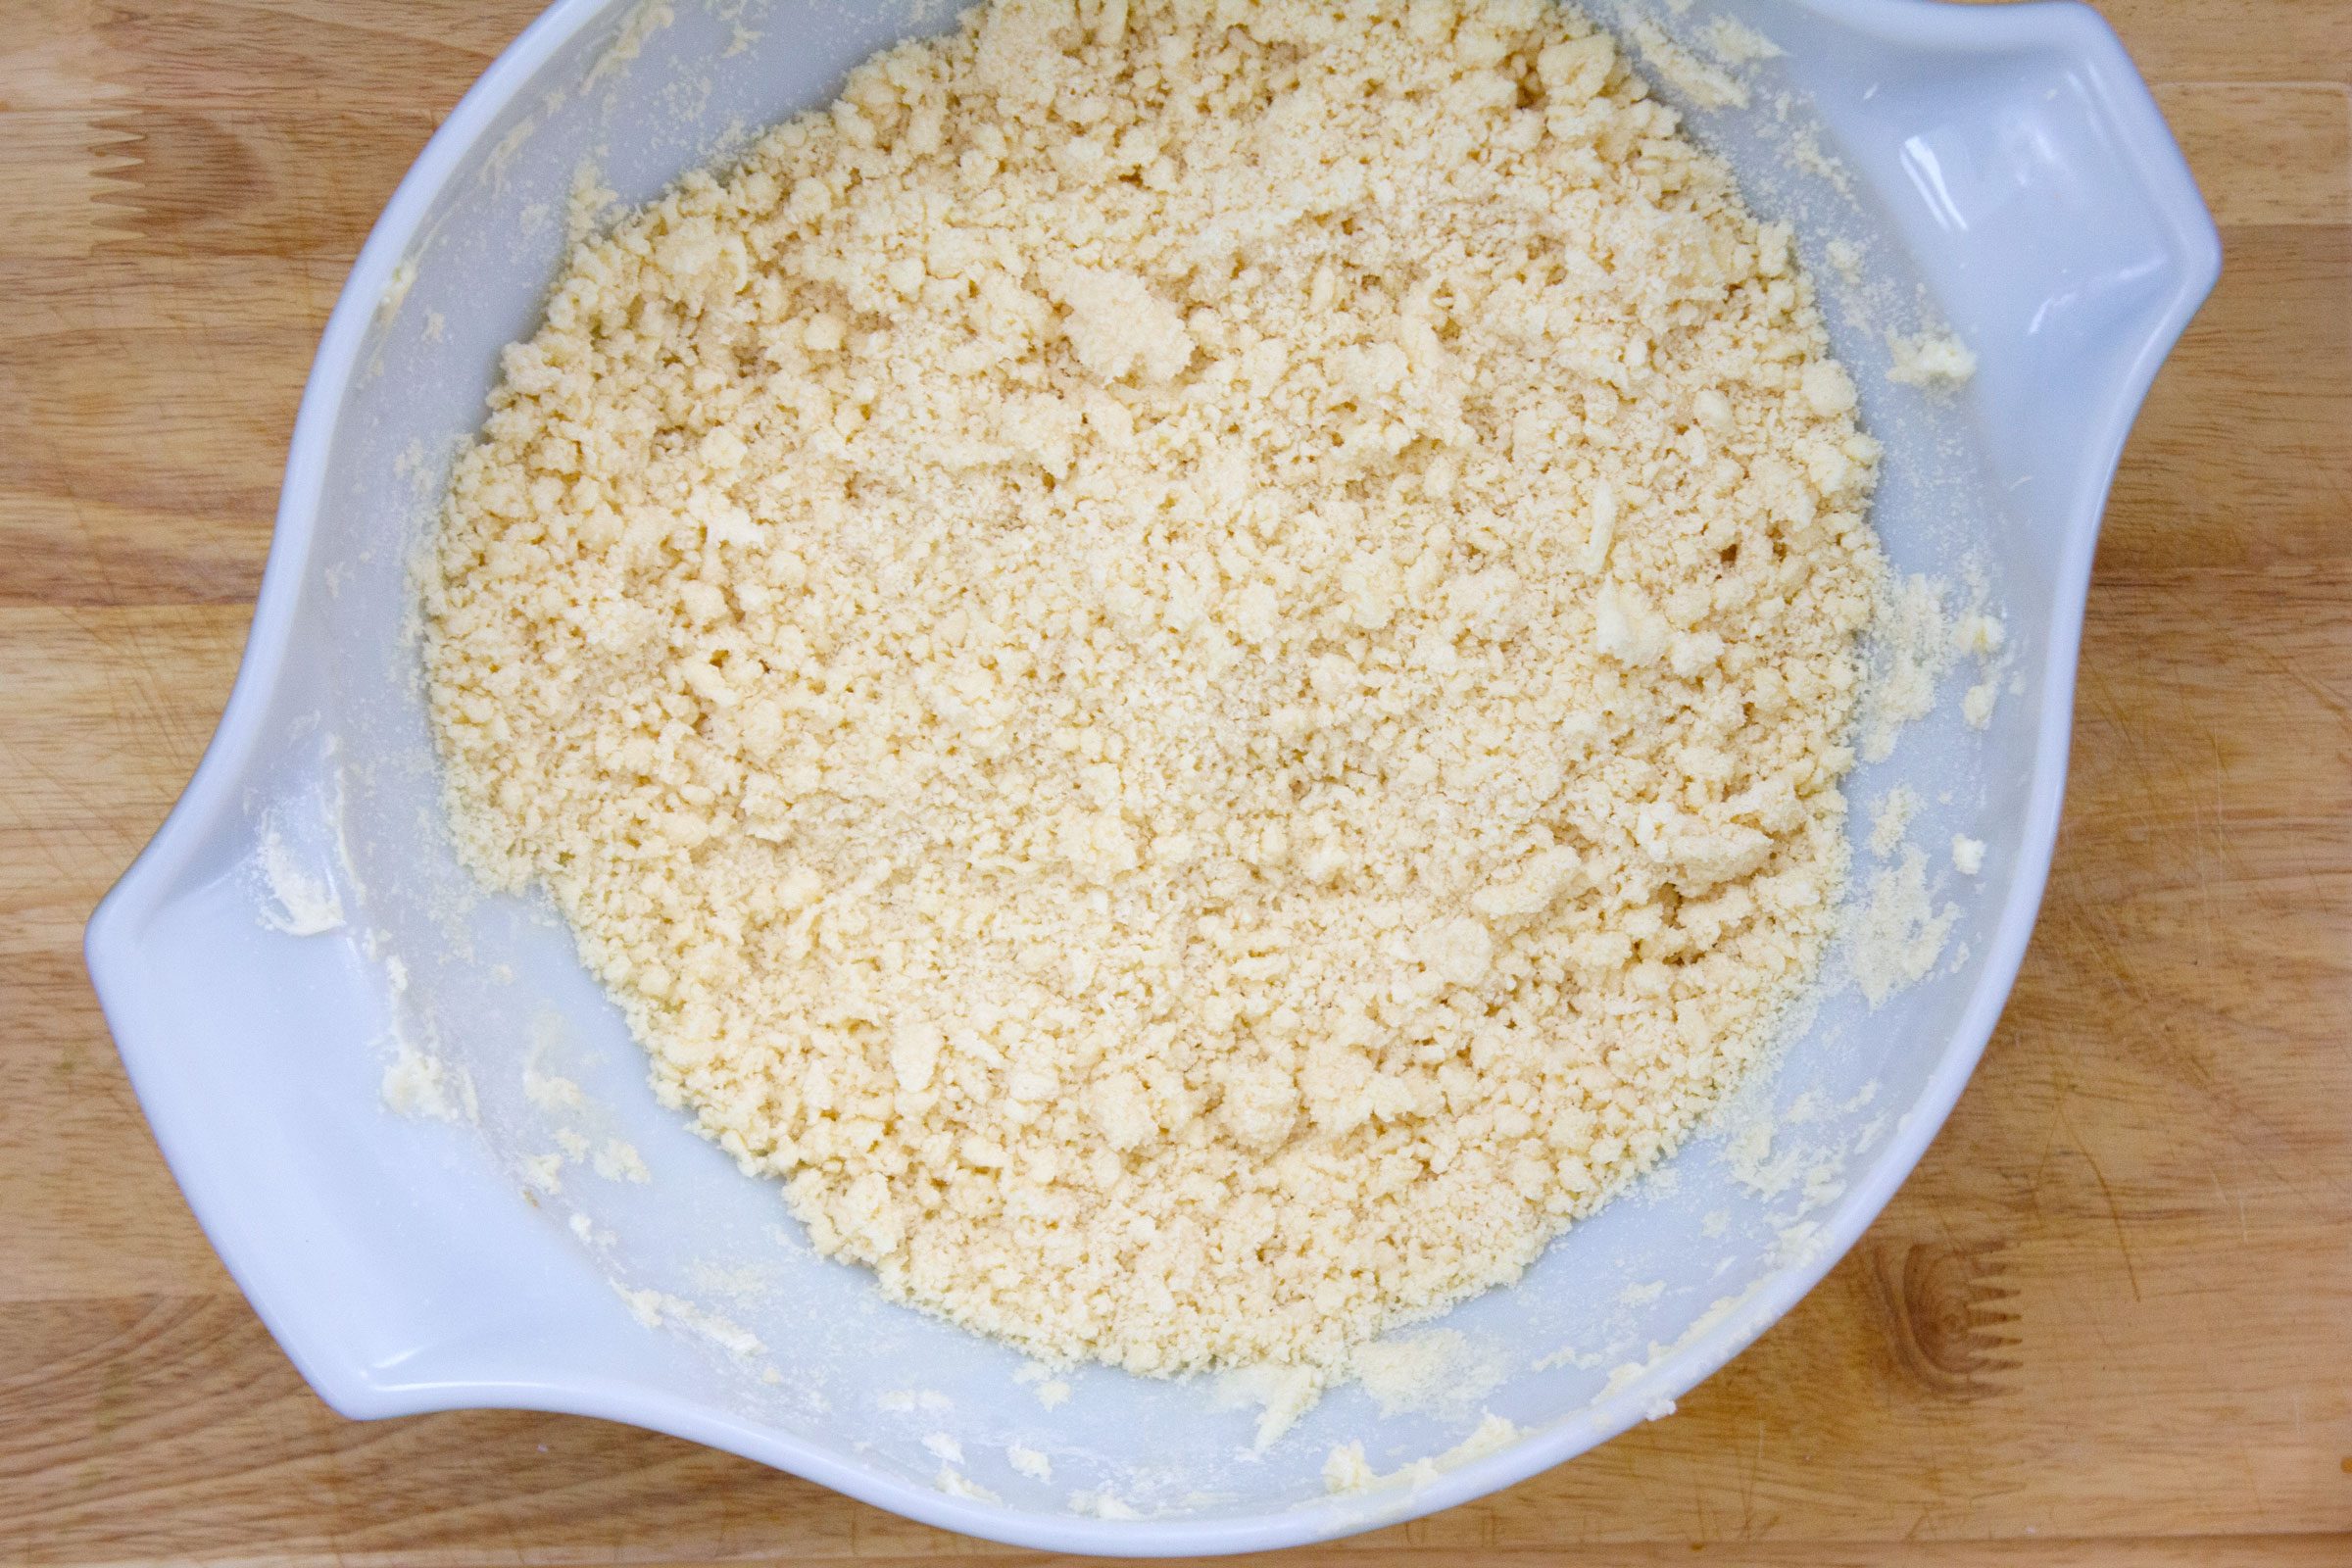 crumbly dough in a plastic bowl on a wooden surface